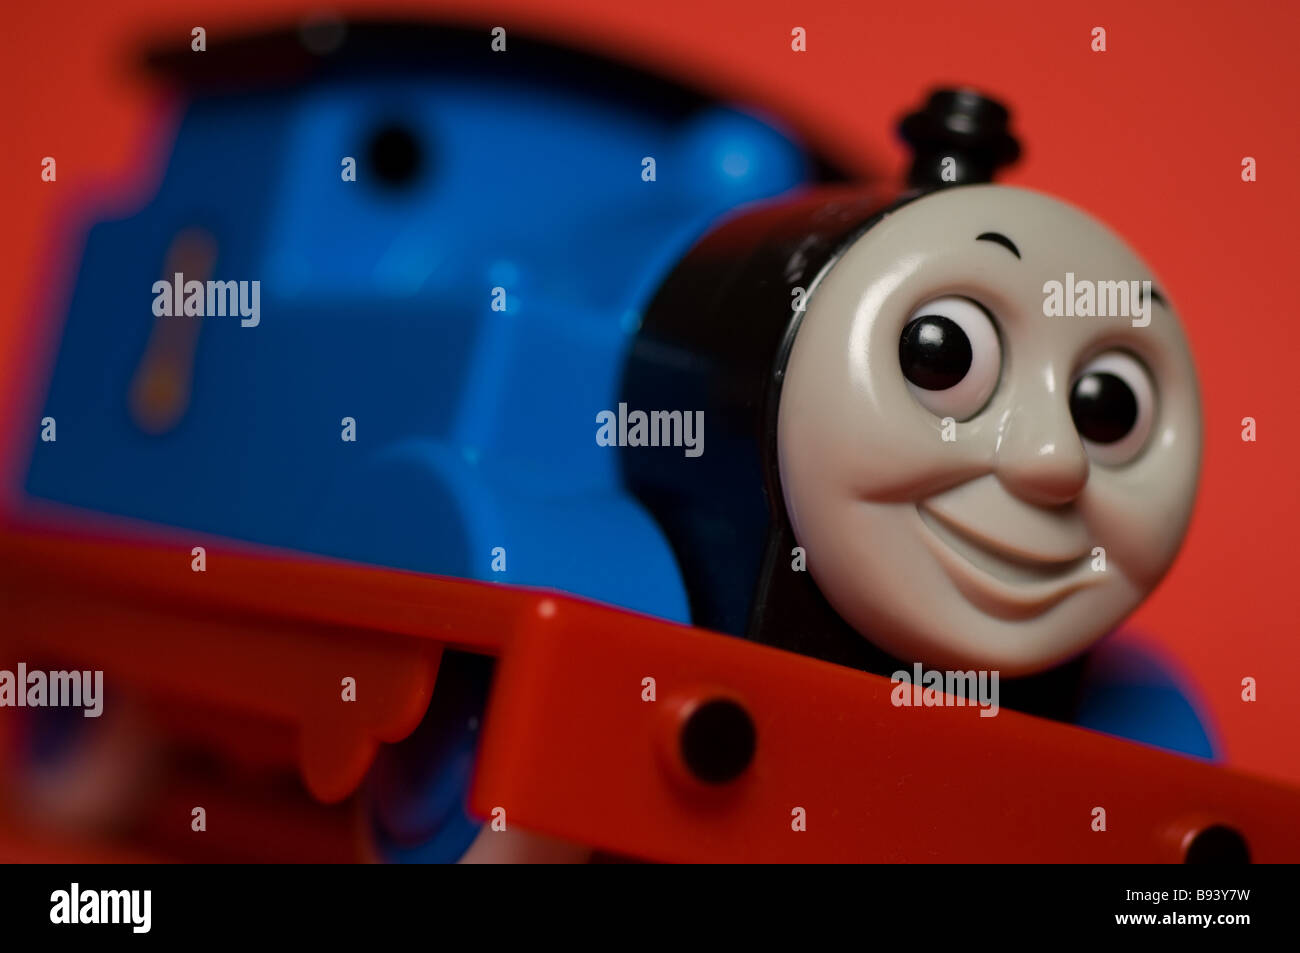 A close up of a child's toy 'Thomas the Tank Engine' on a red background. Stock Photo